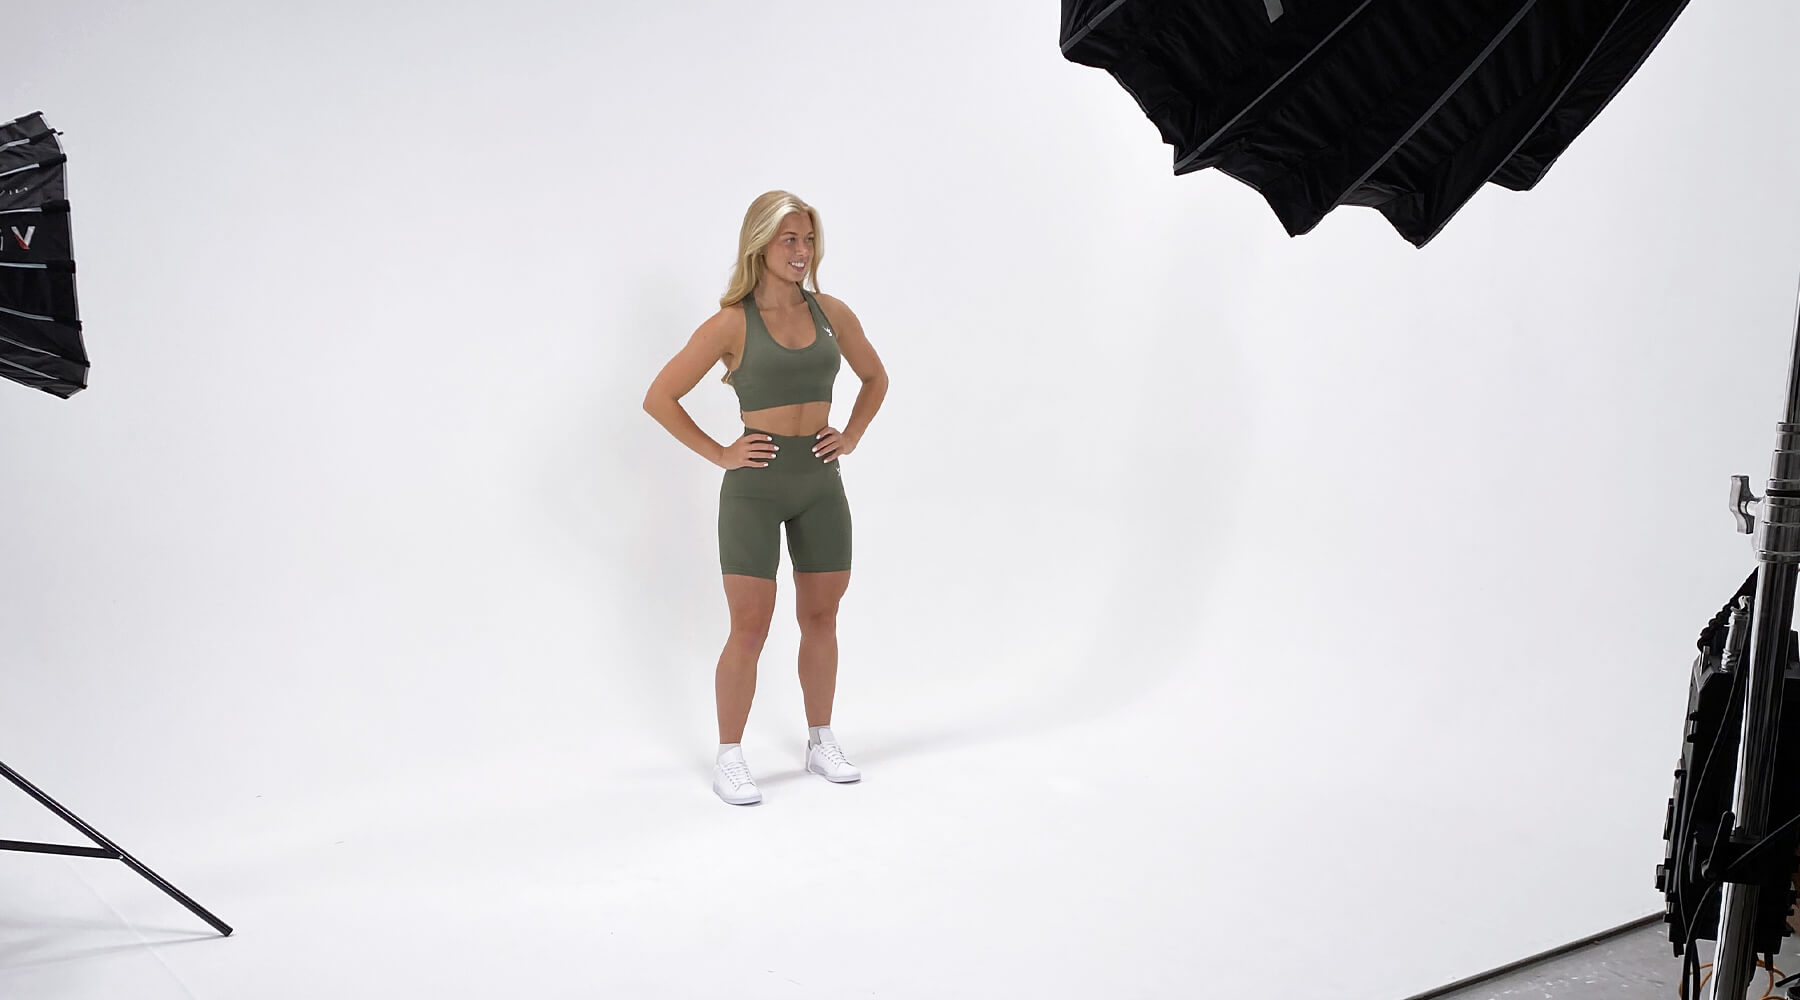 redbaysand tempo seamless scrunch workout collection behind the scenes shoot of our new seamless scrunch bum leggings, shorts, sports bra and long sleeve crop top built for running, yoga, gym workouts